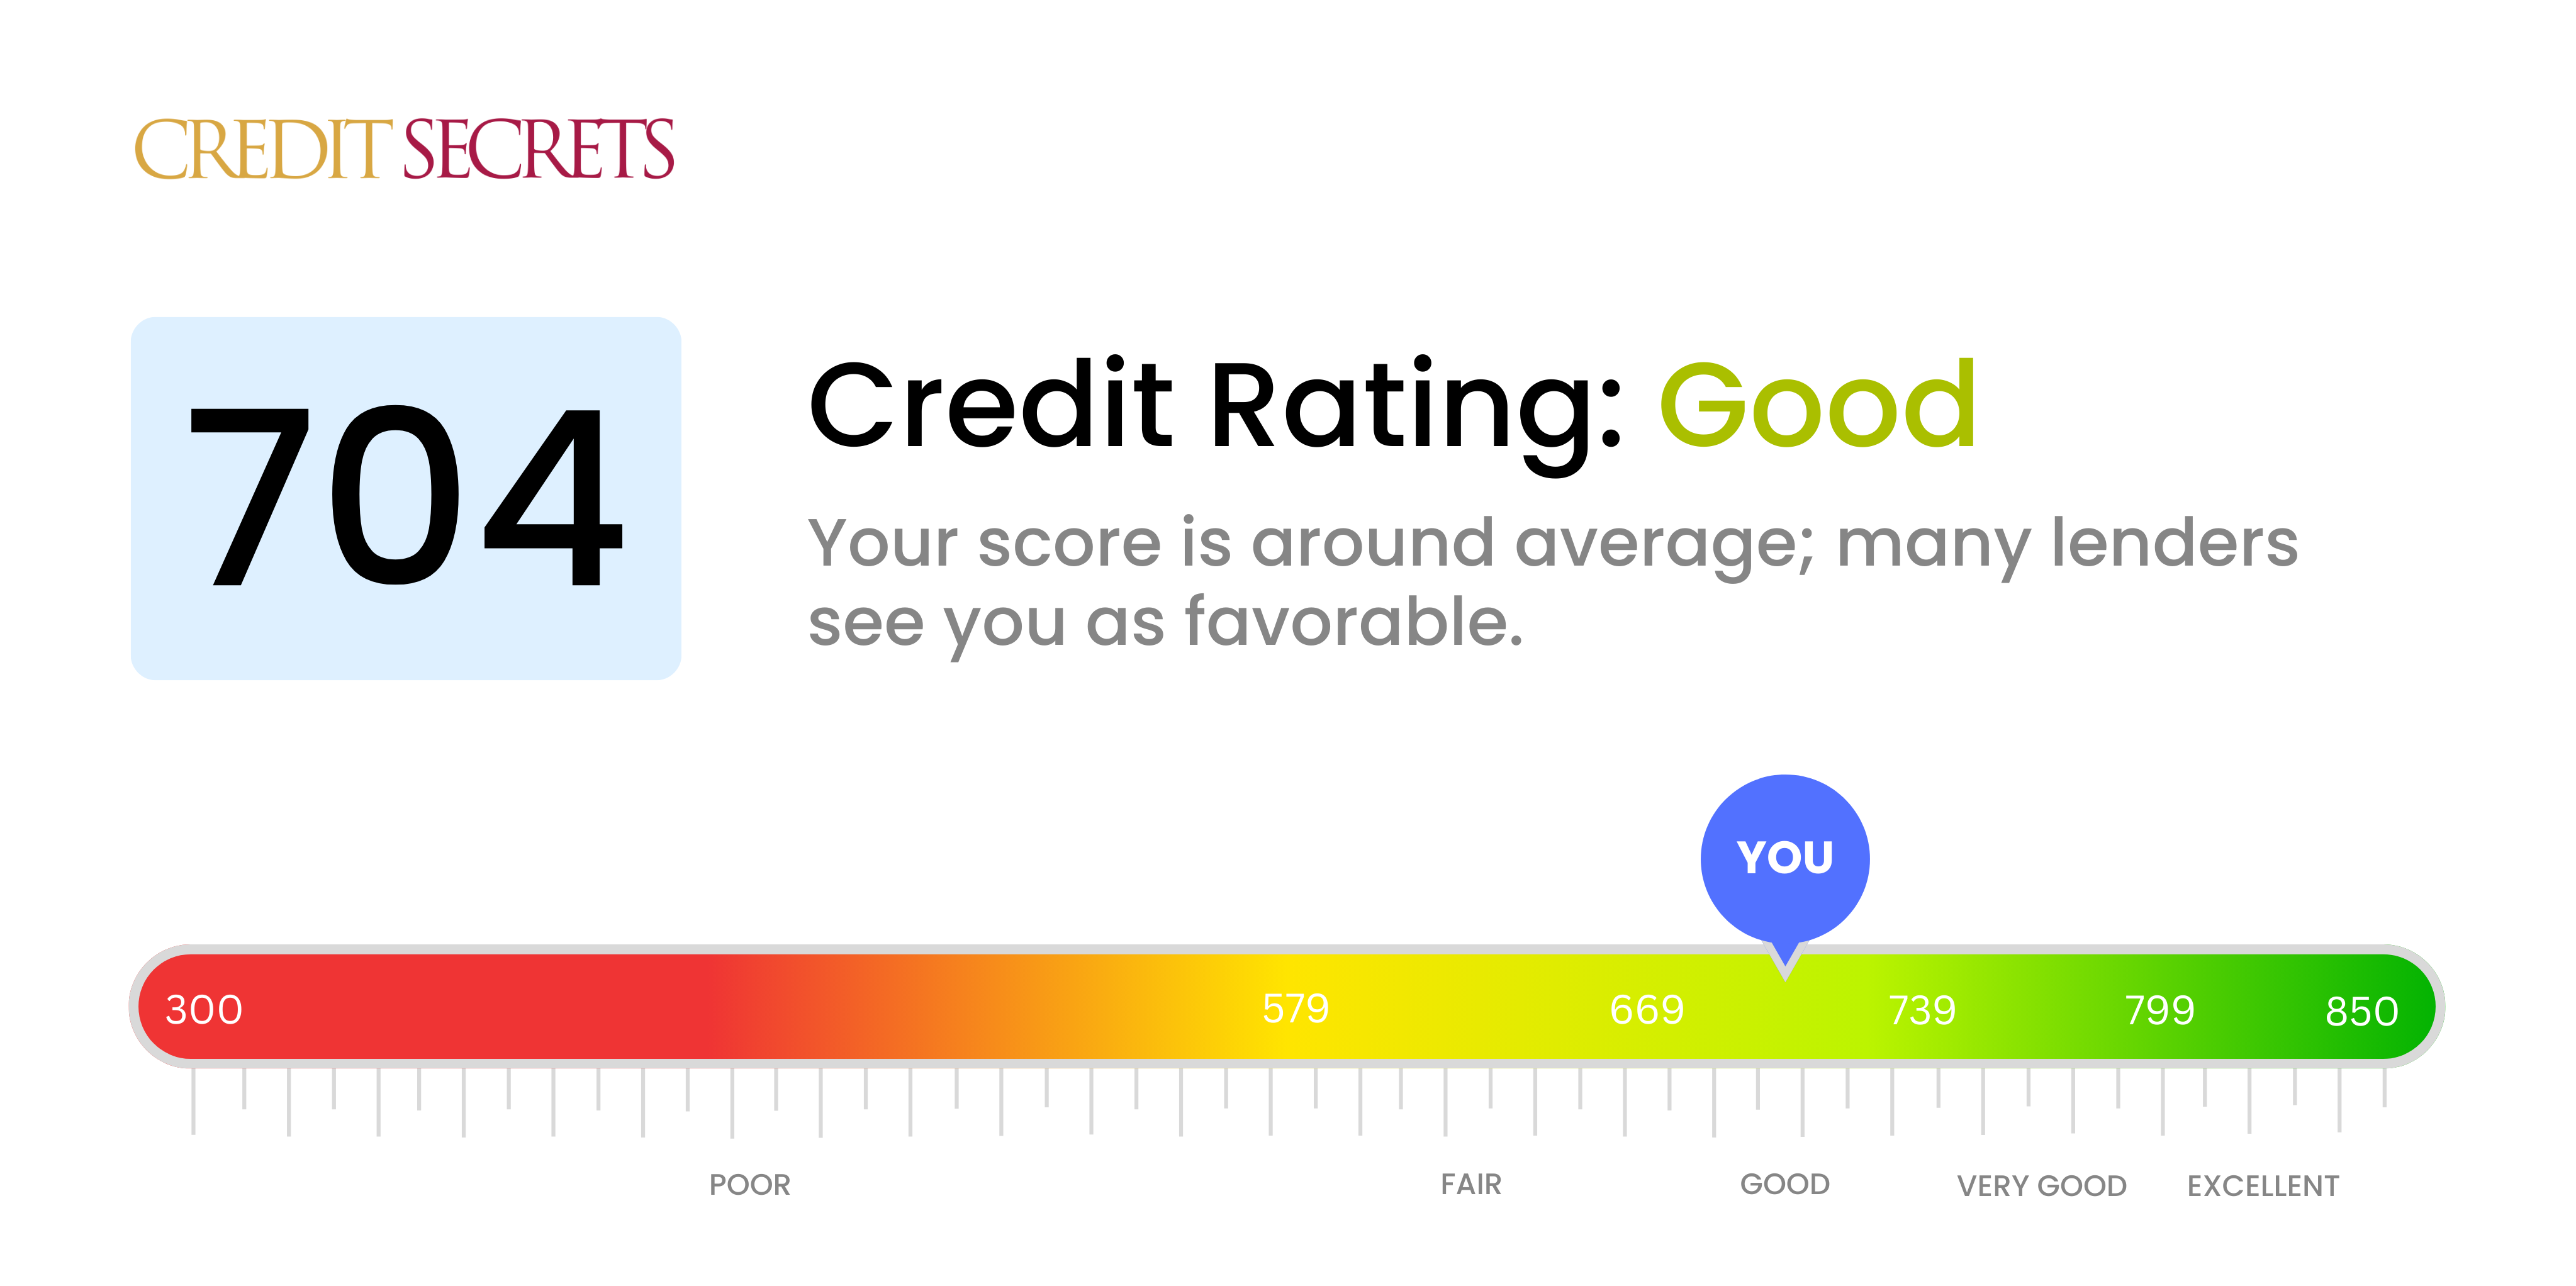 Is 704 a good credit score?